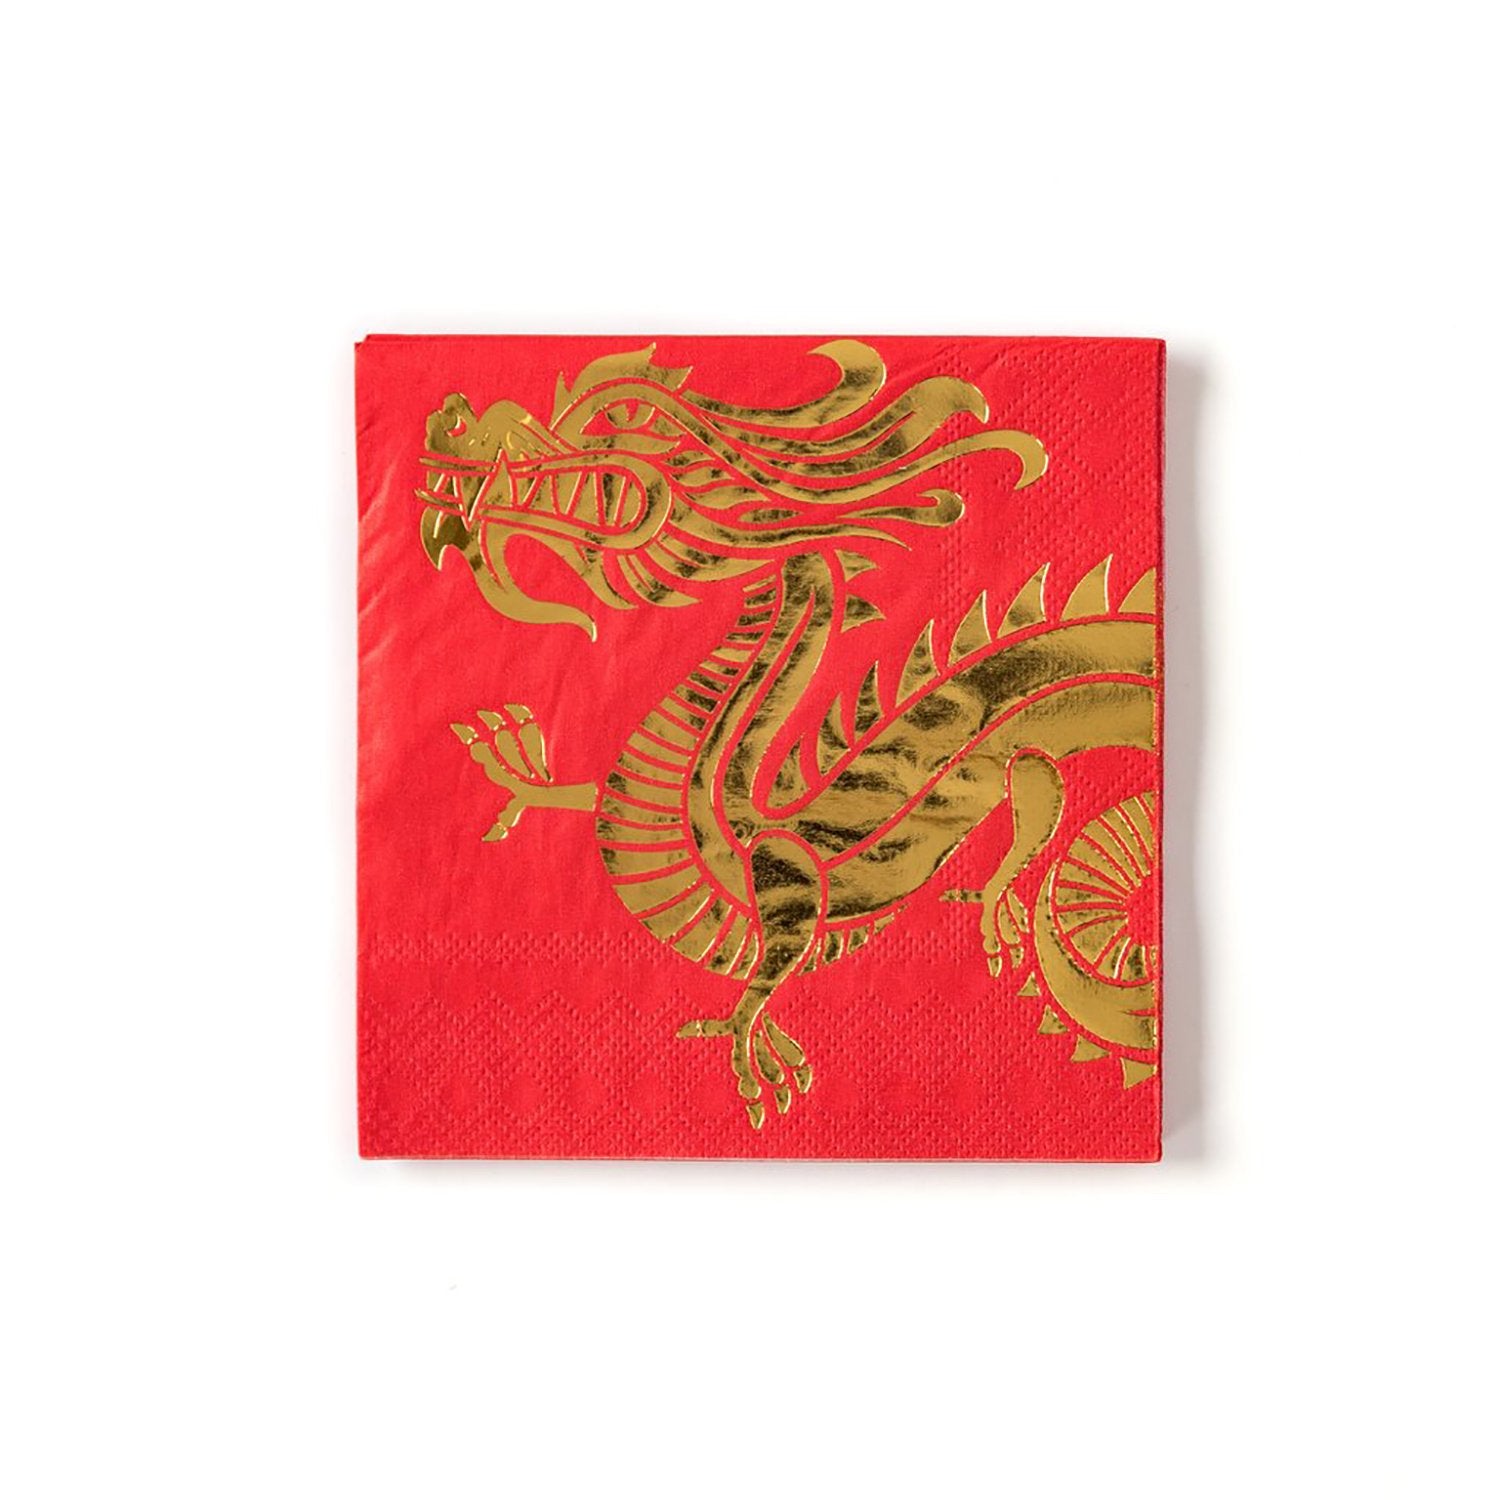 Chinese New Year Party Plates & Napkins - the-parties-that-pop